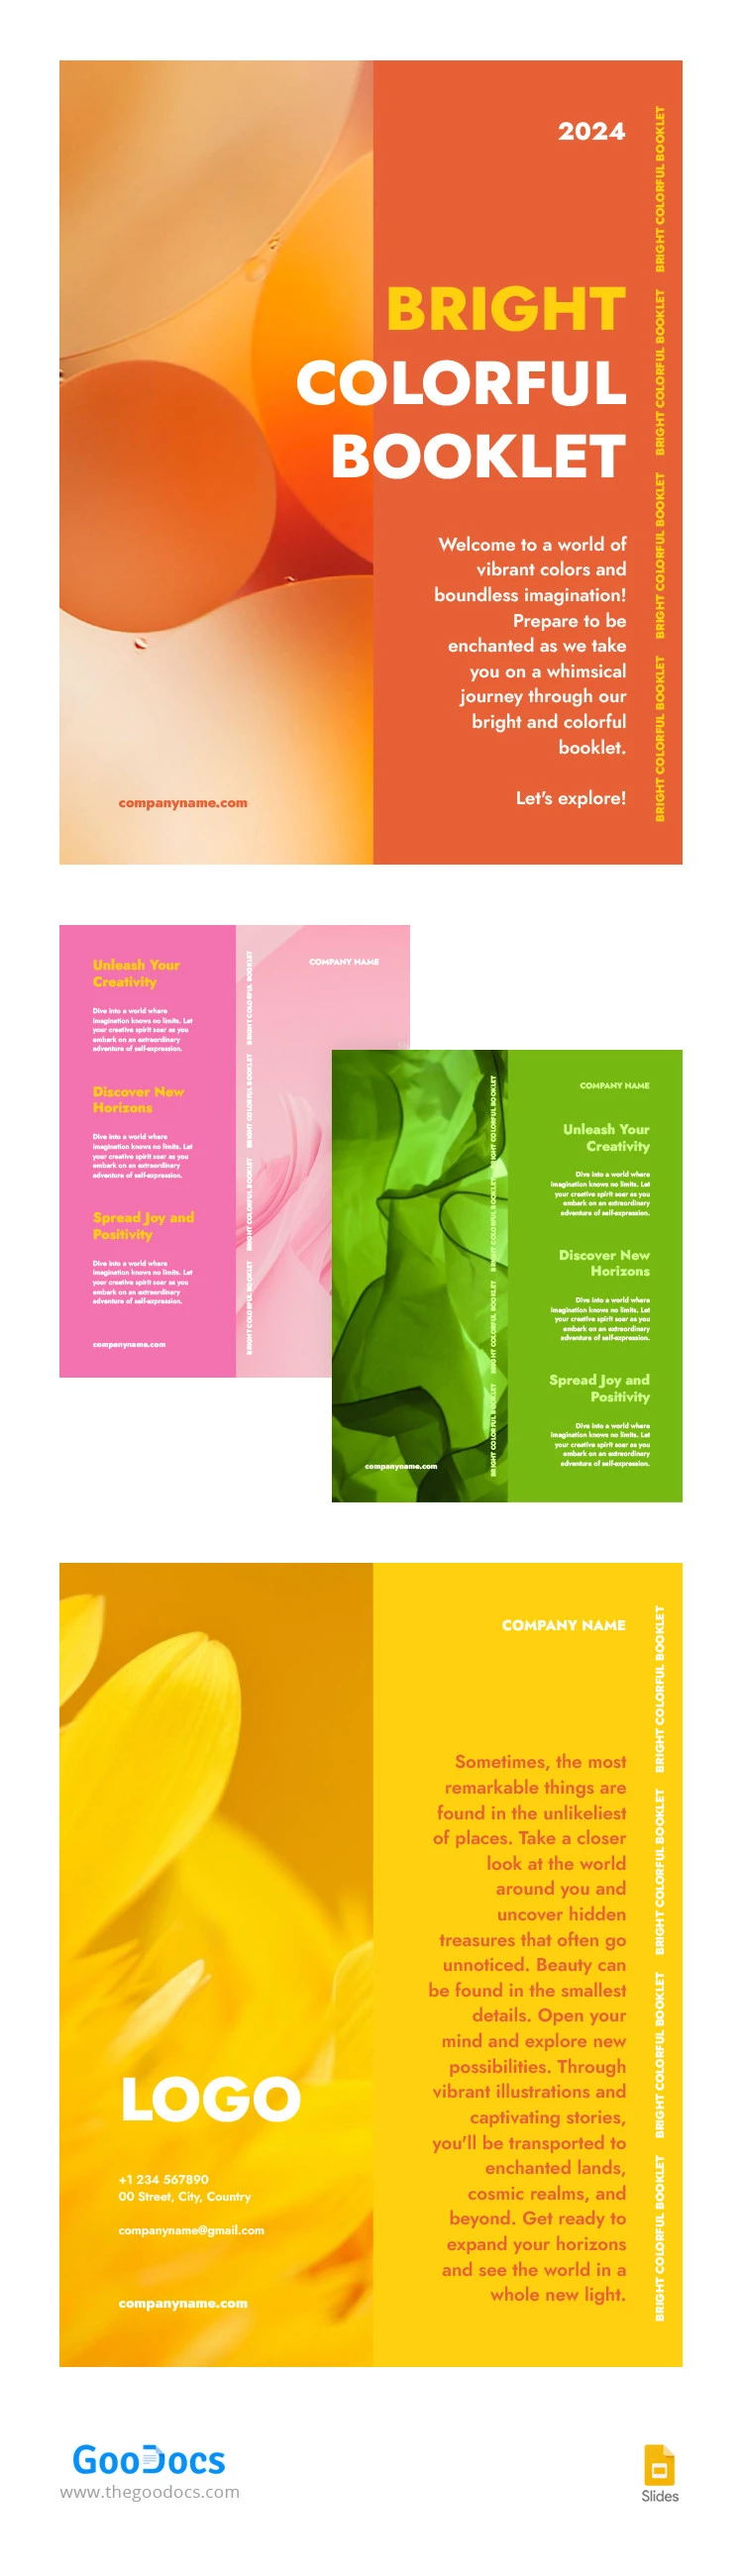 Bright Colorful Booklet - free Google Docs Template - 10066202